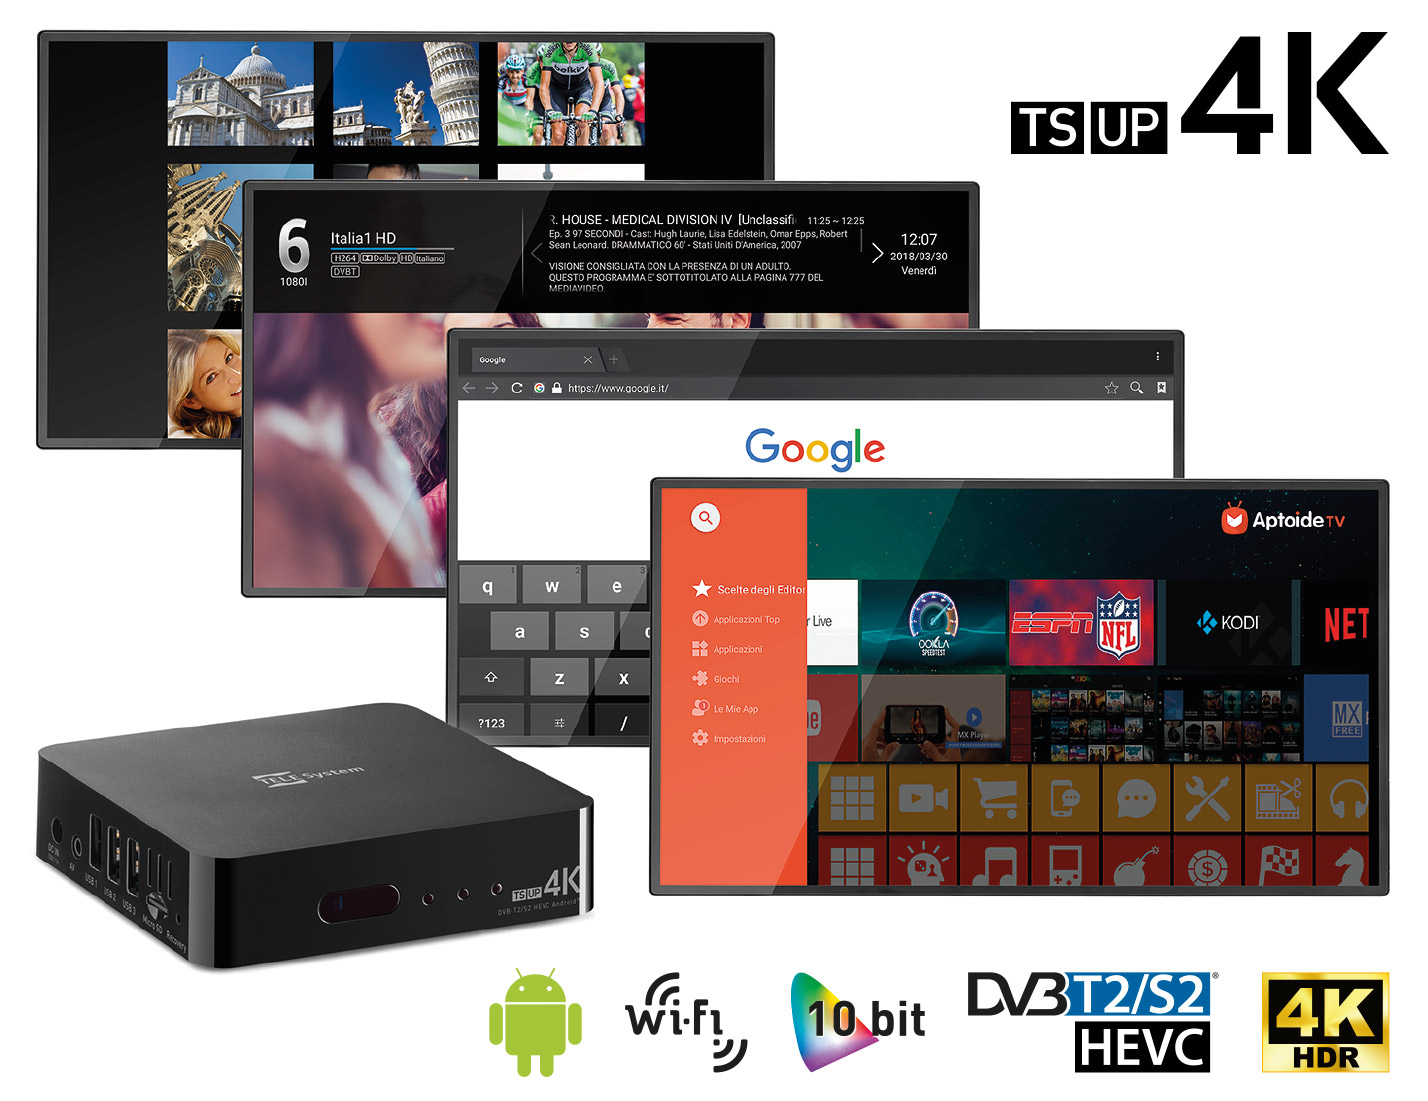 TELE System Smart Box Android + tuner DVB-T2/S2 HEVC Ultra HD